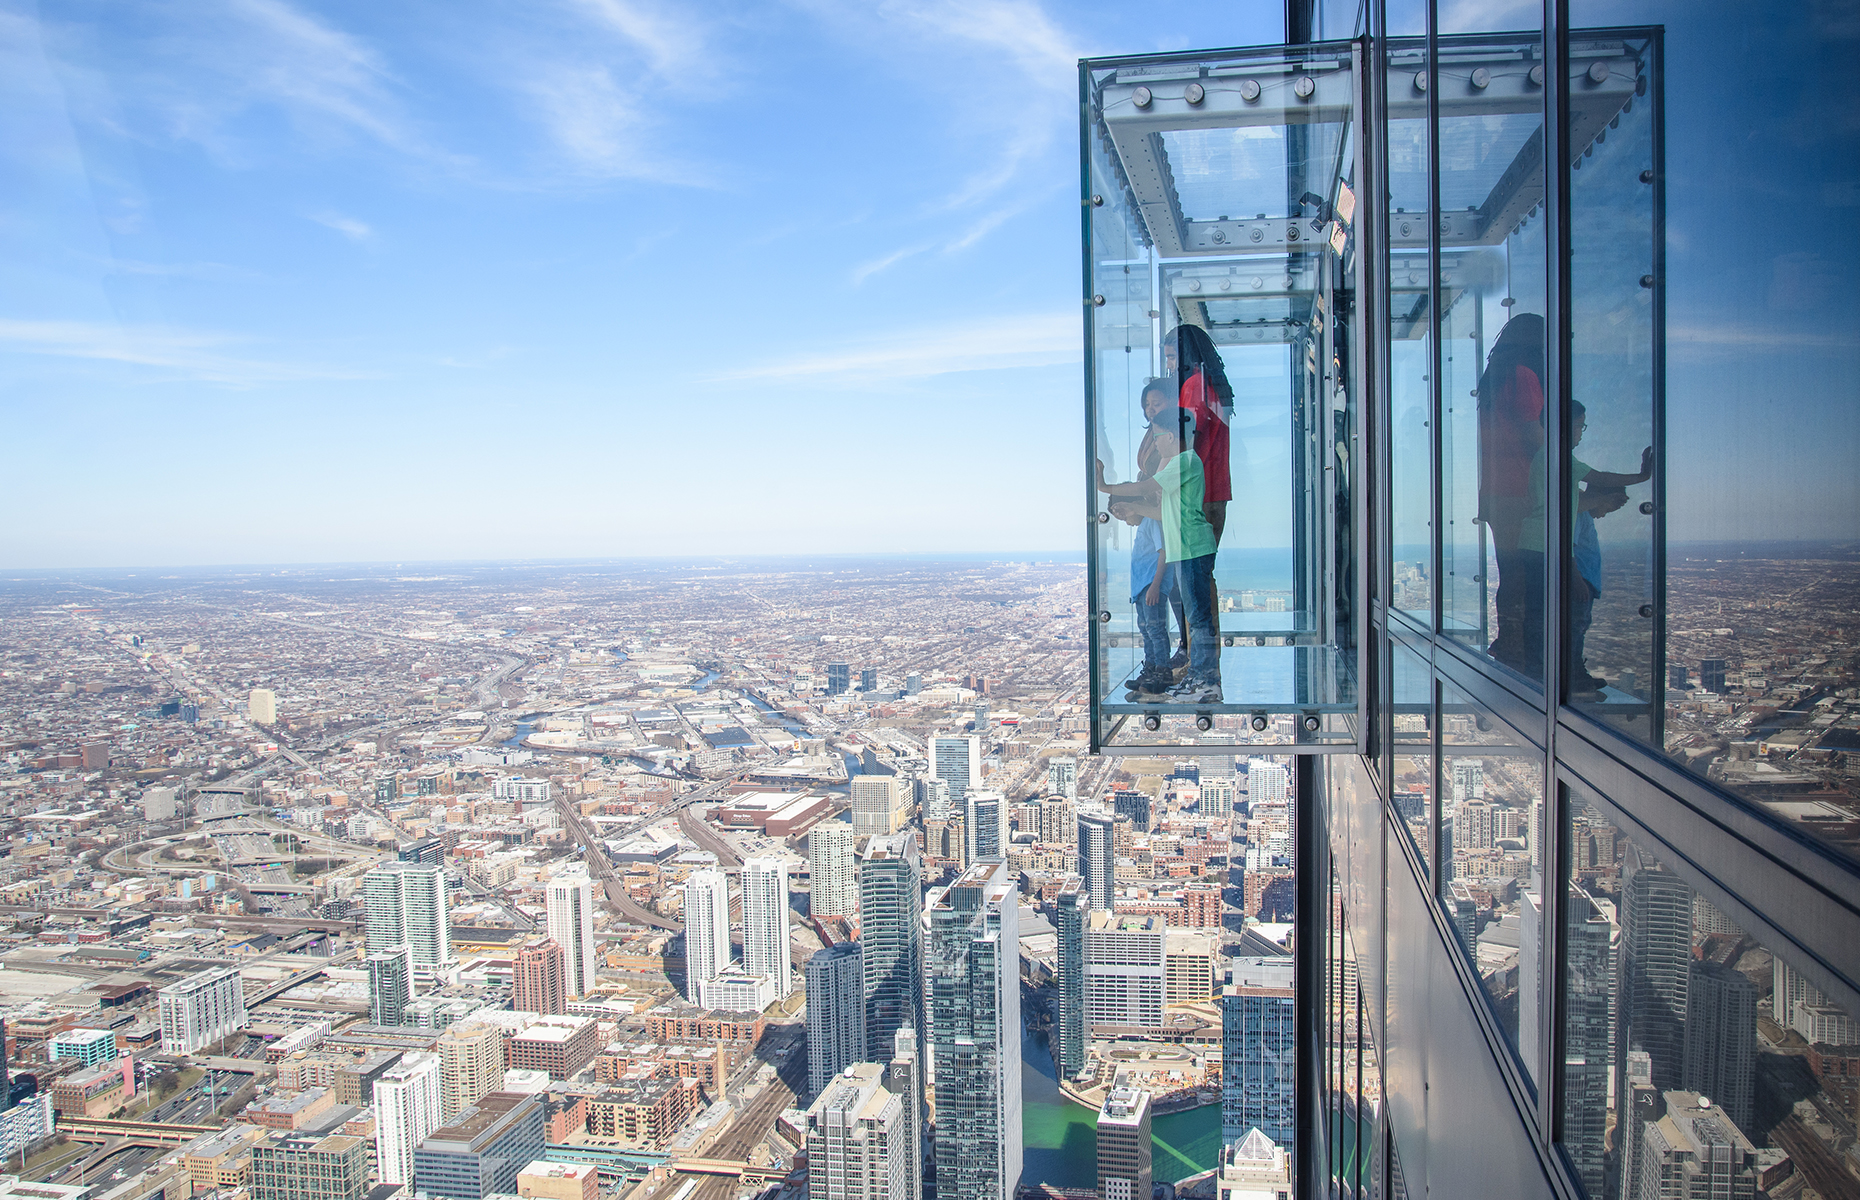 Willis Tower Sky Deck, Chicago (Image: Courtesy of Choose Chicago)